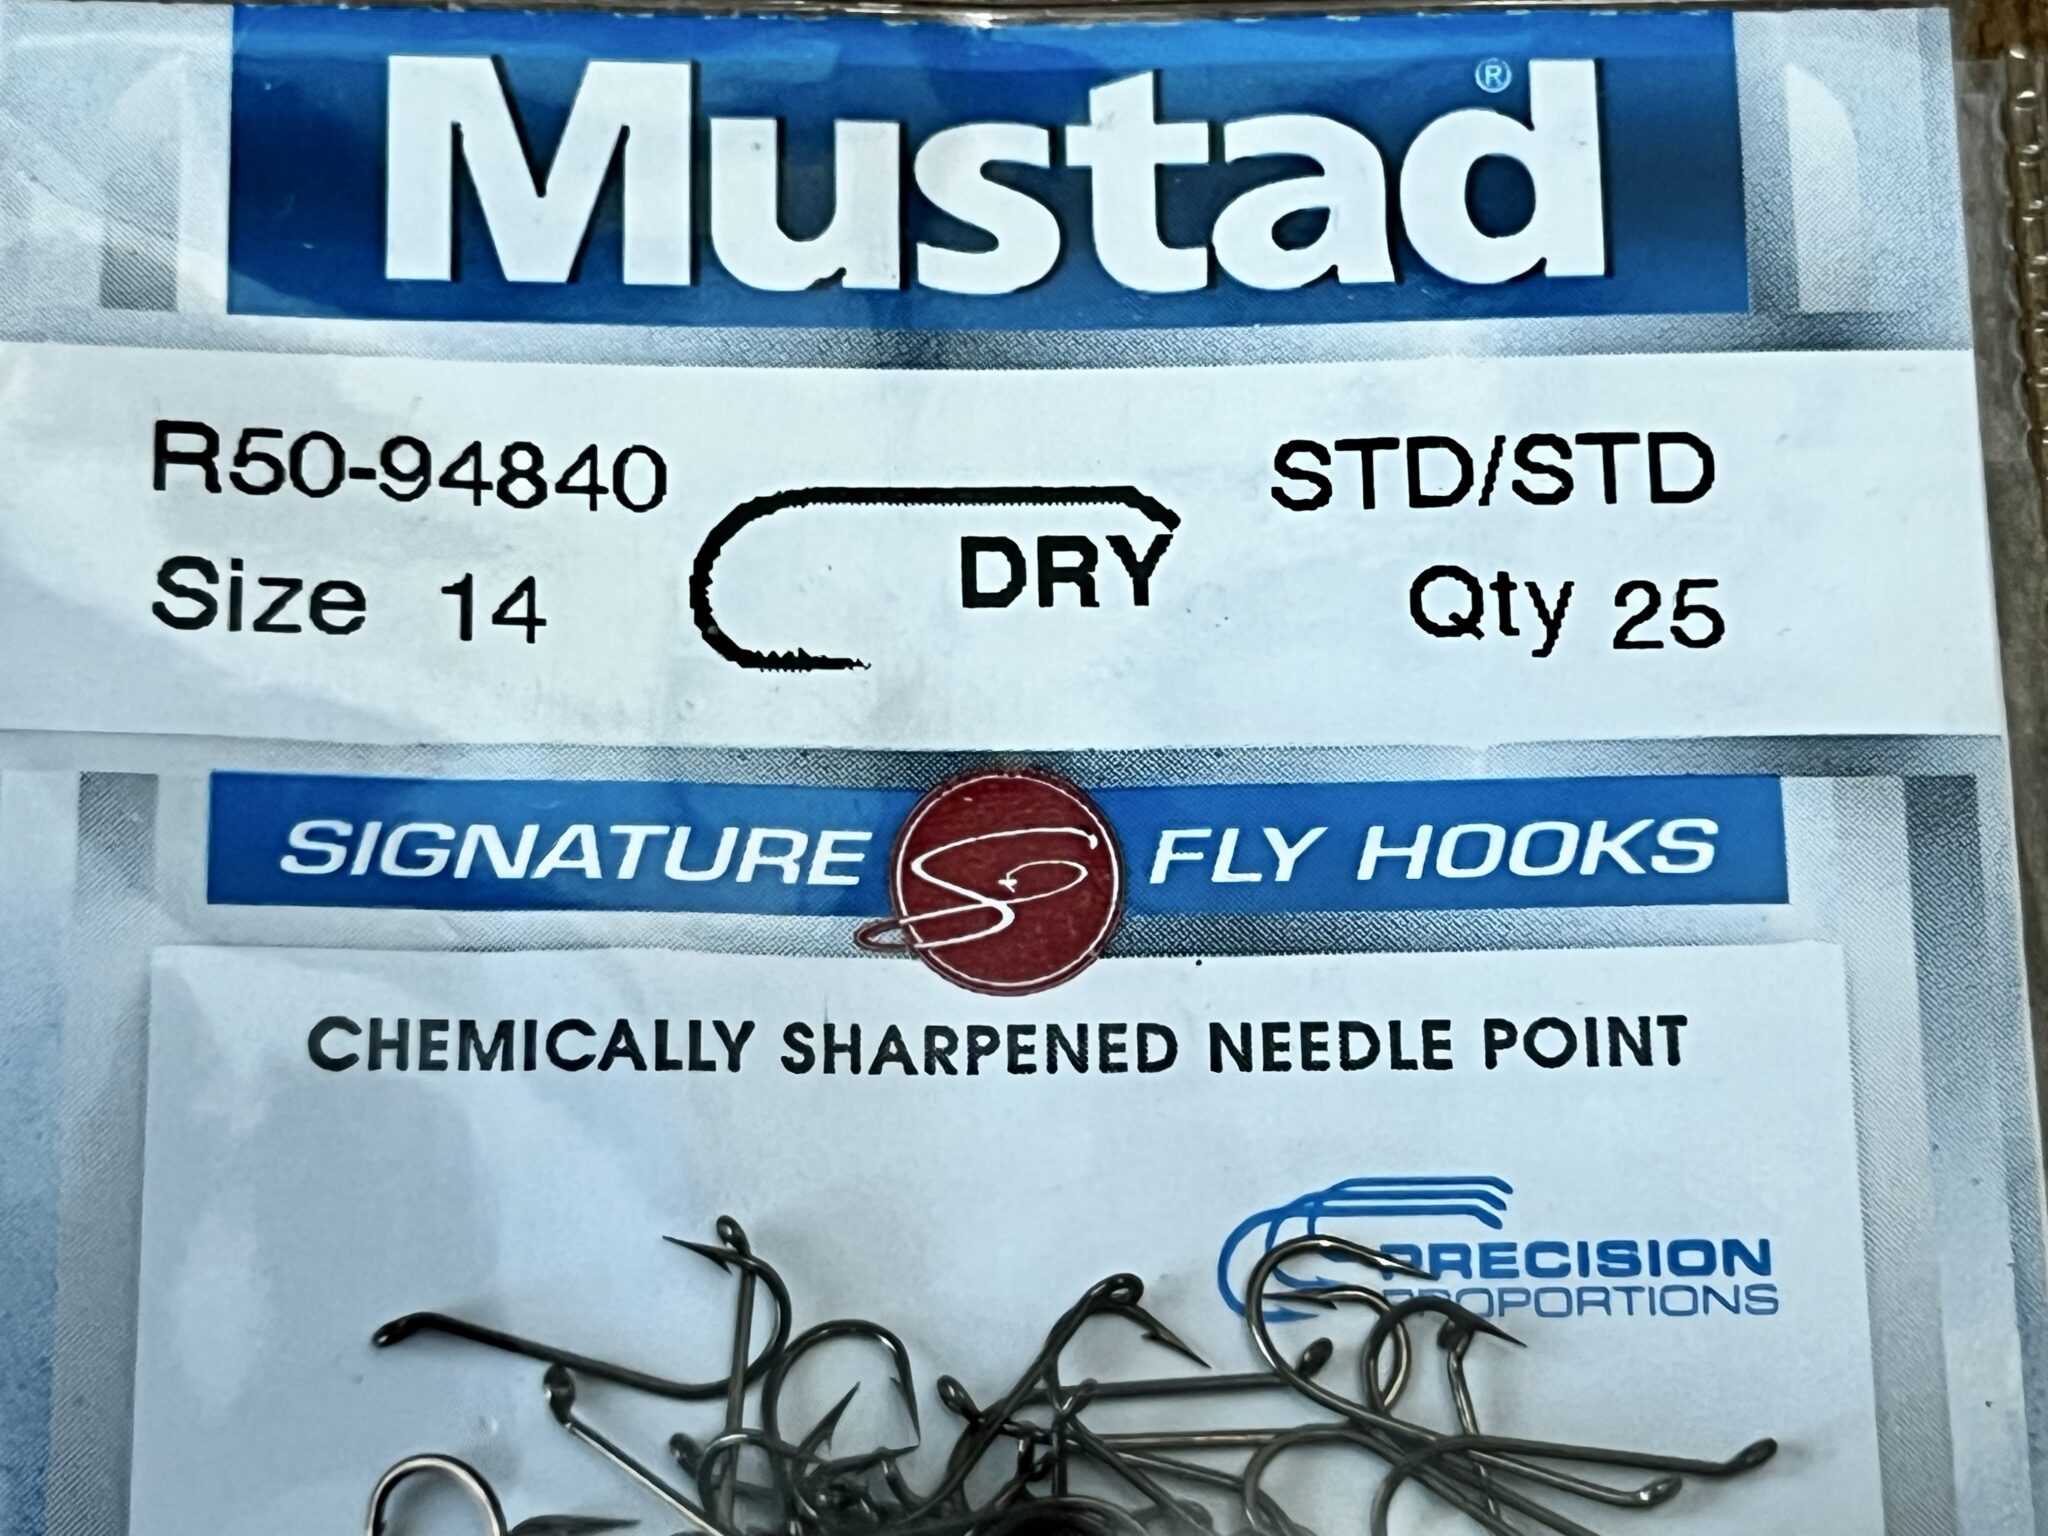 Mustad Signature Series Dry Fly Hook R50-94840 Size 22, 25 Pack